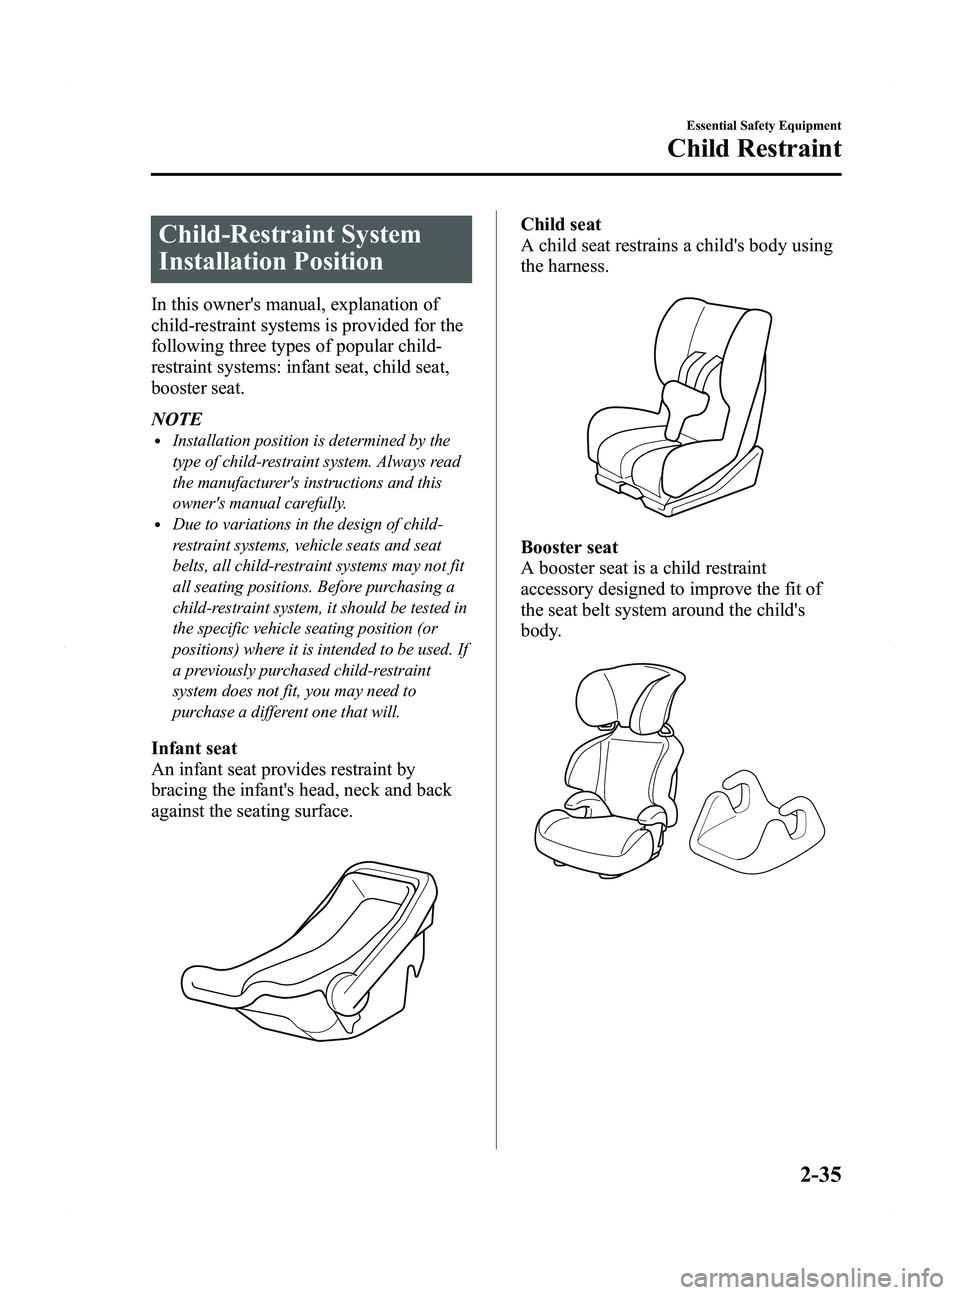 MAZDA MODEL 5 2015 Service Manual Black plate (47,1)
Child-Restraint System
Installation Position
In this owners manual, explanation of
child-restraint systems is provided for the
following three types of popular child-
restraint sys